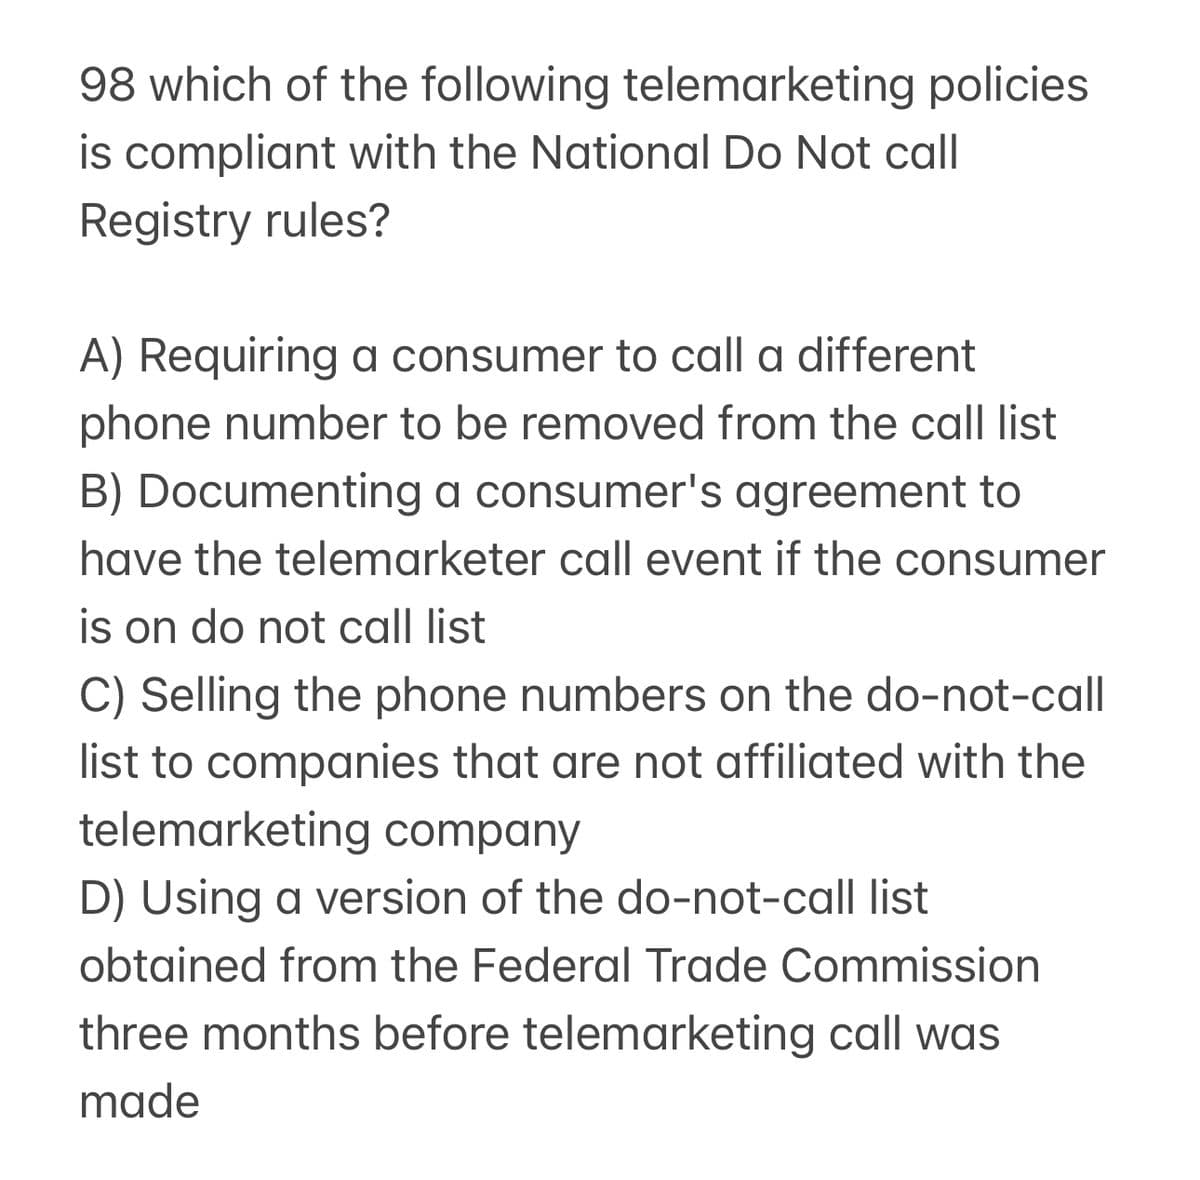 98 which of the following telemarketing policies
is compliant with the National Do Not call
Registry rules?
A) Requiring a consumer to call a different
phone number to be removed from the call list
B) Documenting a consumer's agreement to
have the telemarketer call event if the consumer
is on do not call list
C) Selling the phone numbers on the do-not-call
list to companies that are not affiliated with the
telemarketing company
D) Using a version of the do-not-call list
obtained from the Federal Trade Commission
three months before telemarketing call was
made